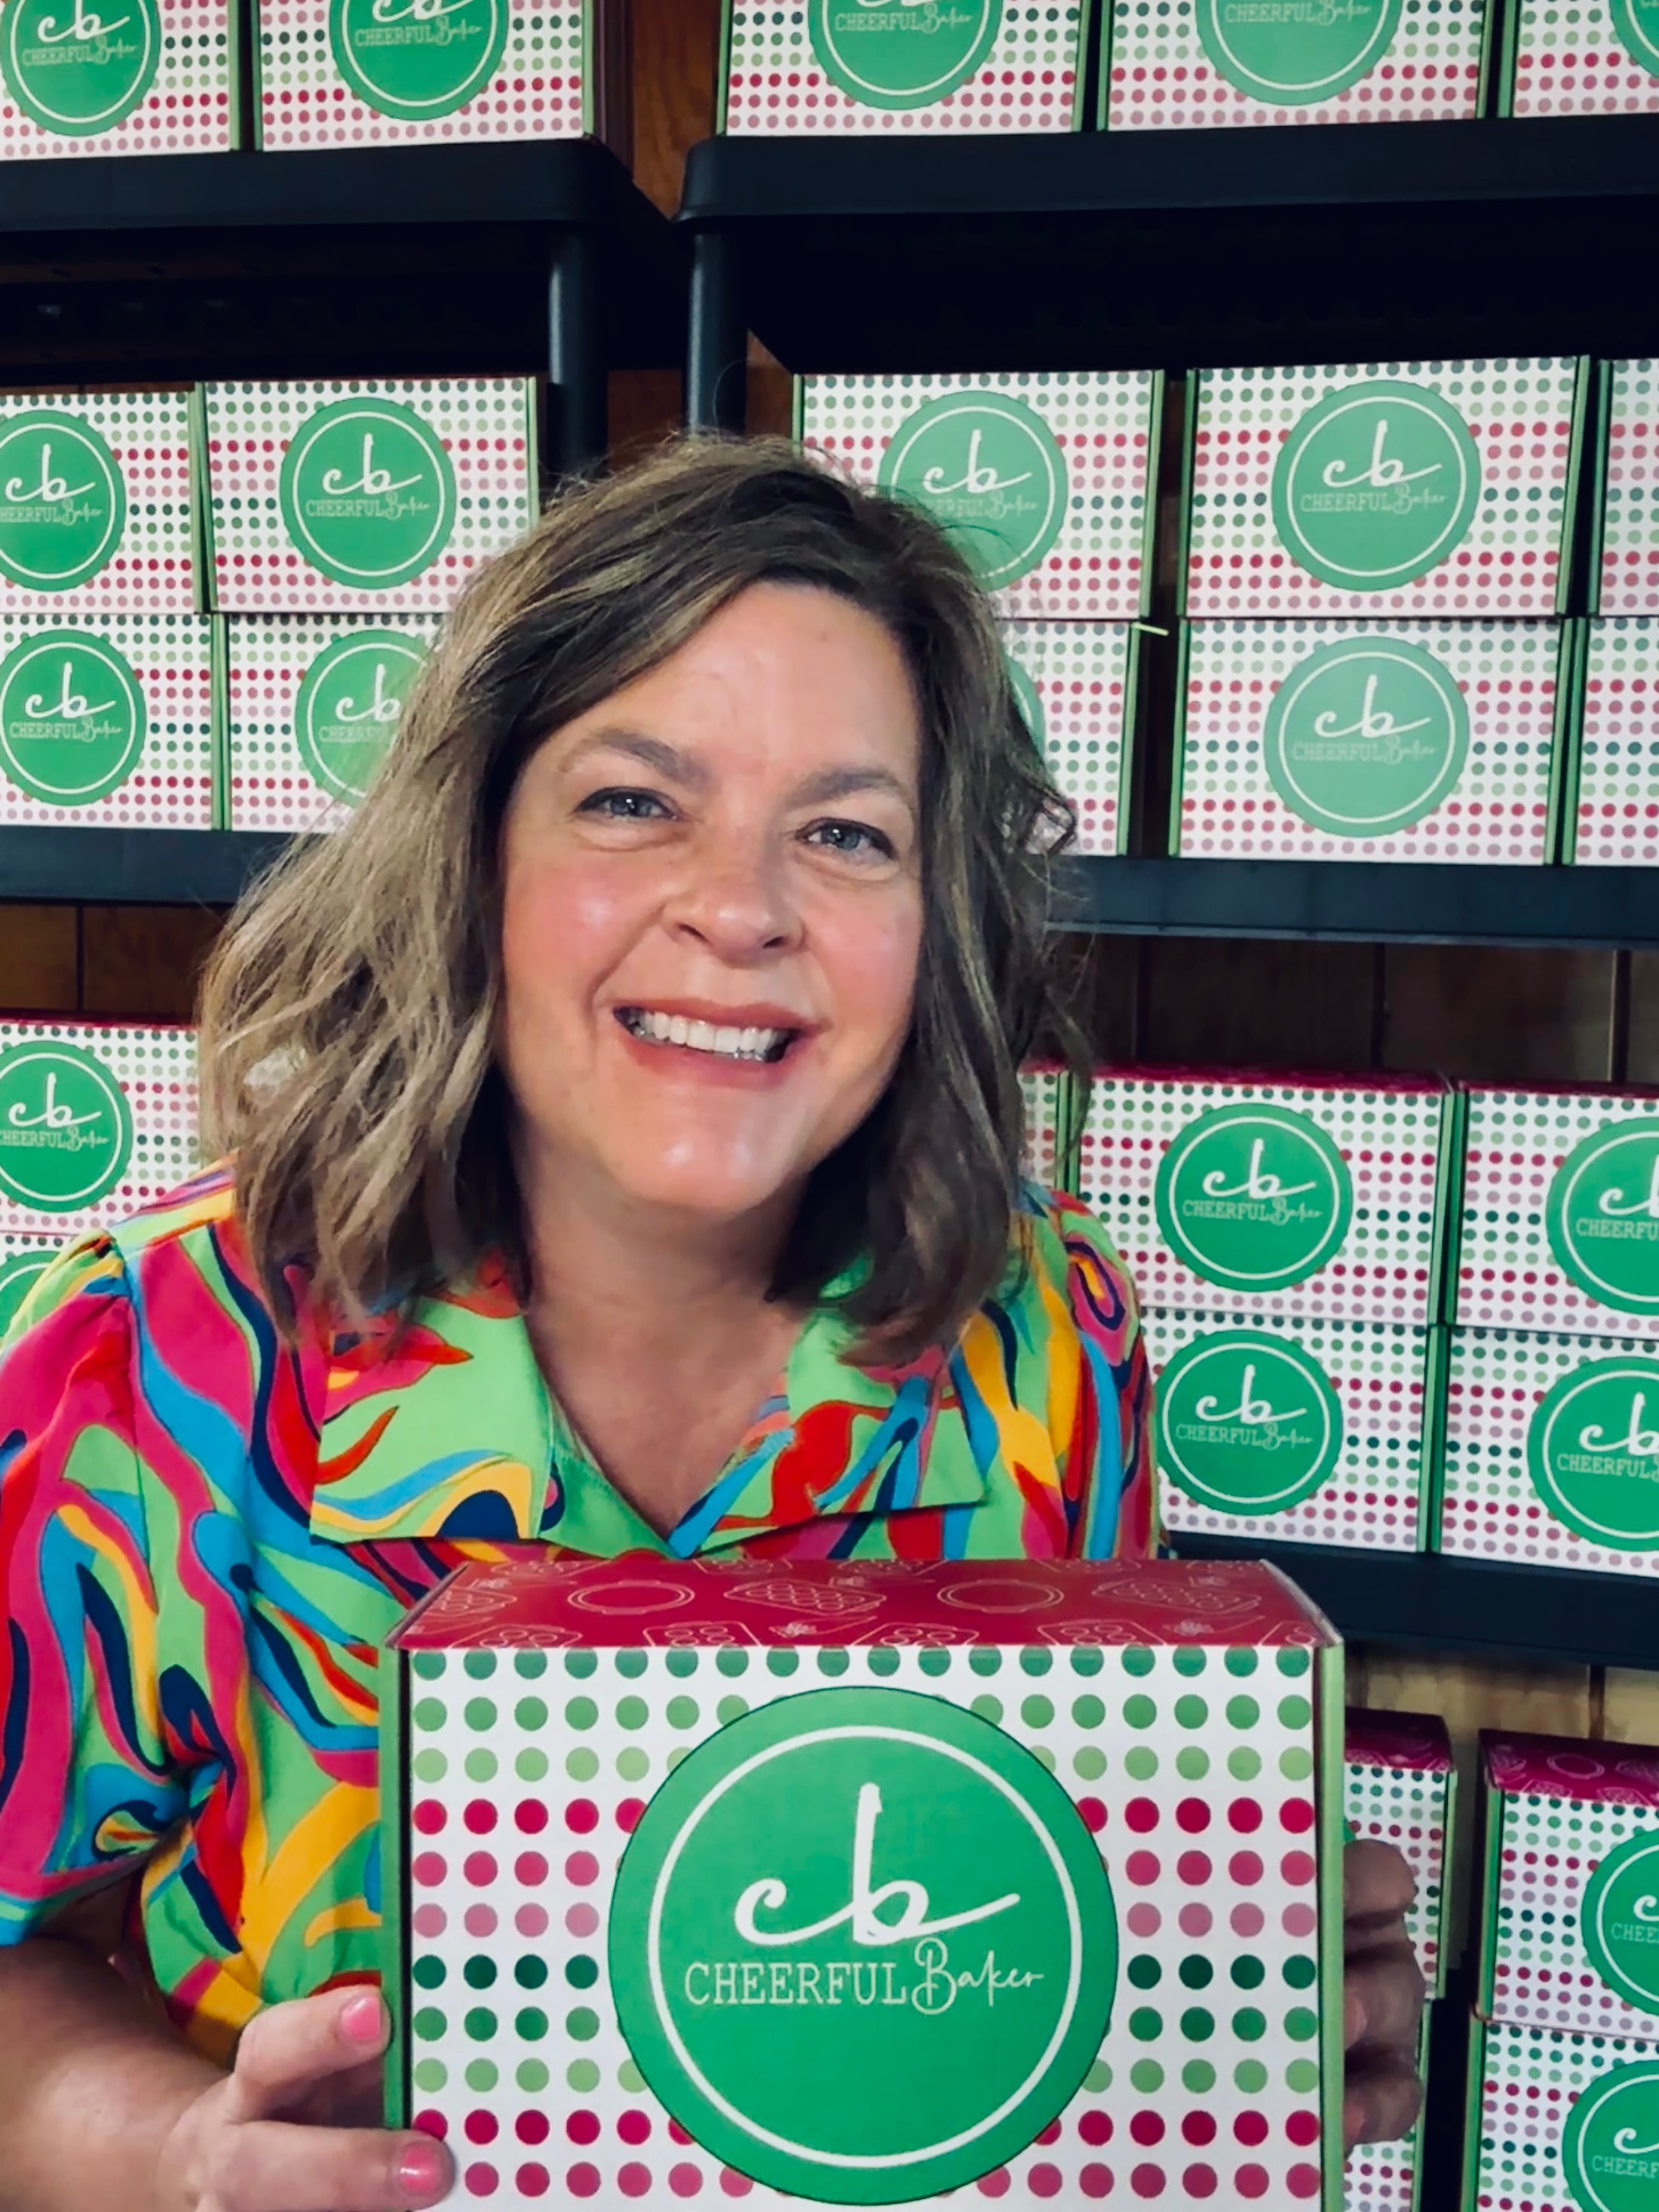 The Cheerful Baker holding a cookie cutter subscription box